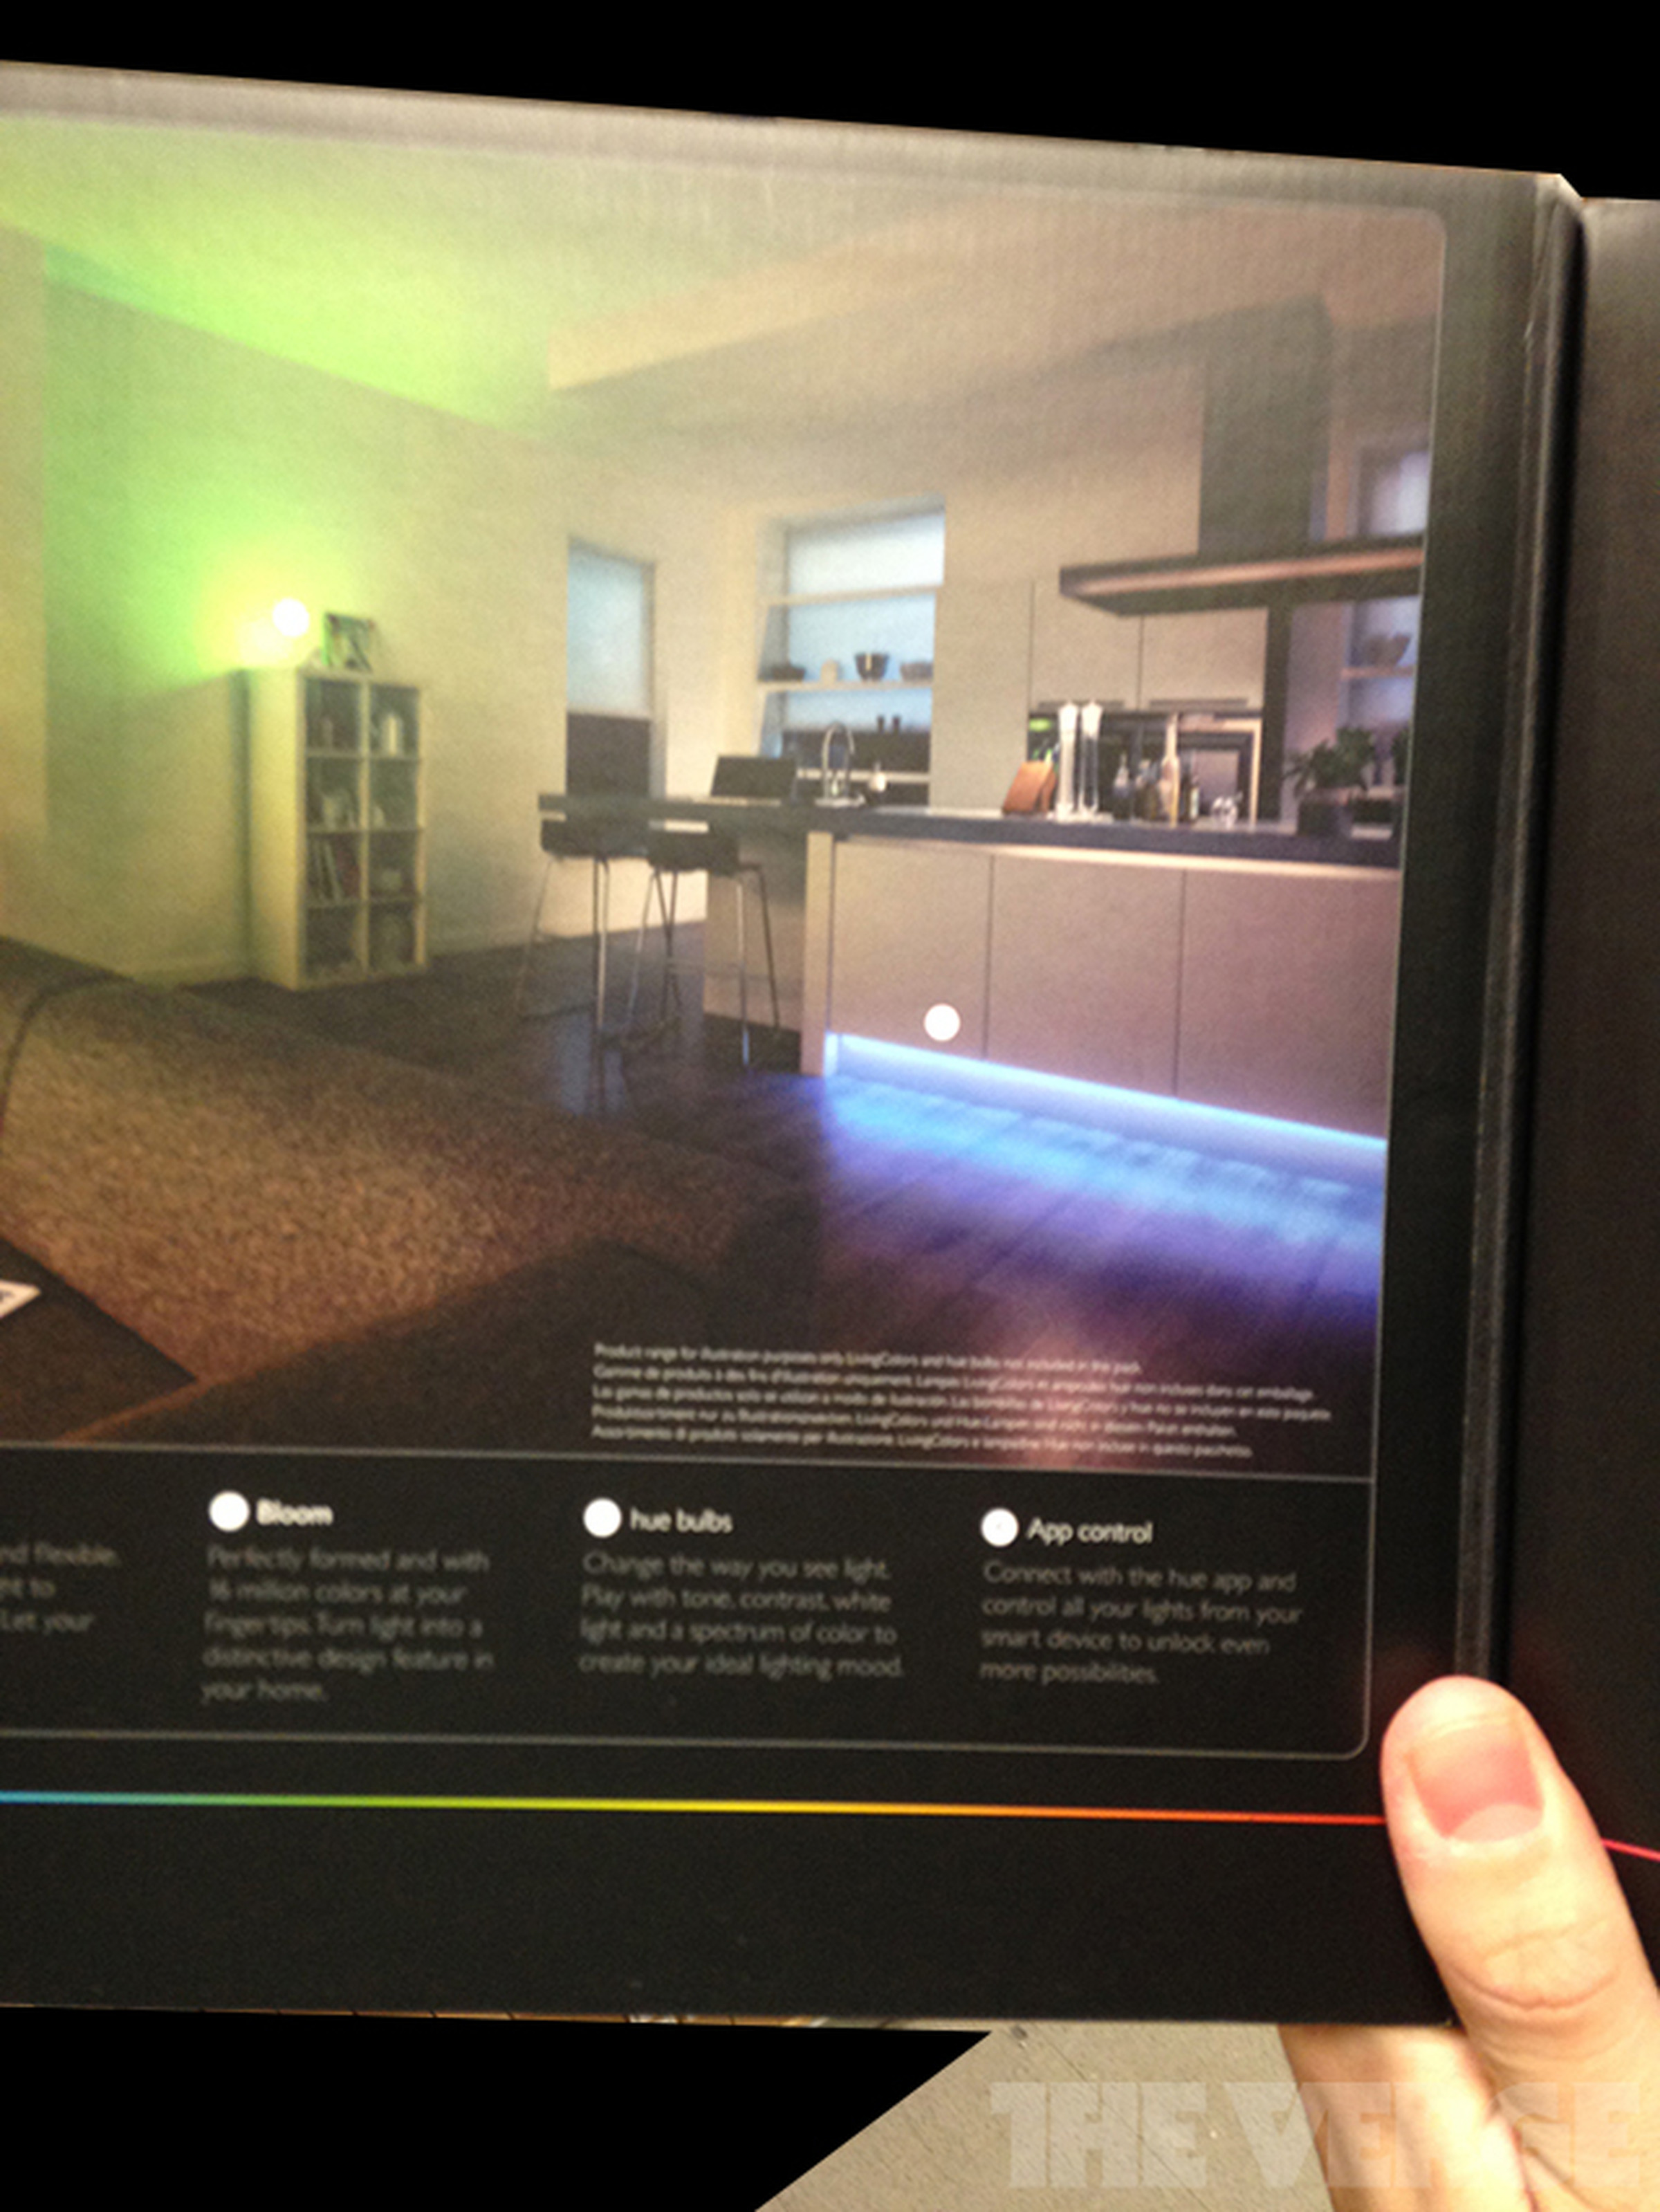 Philips Hue LightStrips and Bloom photos